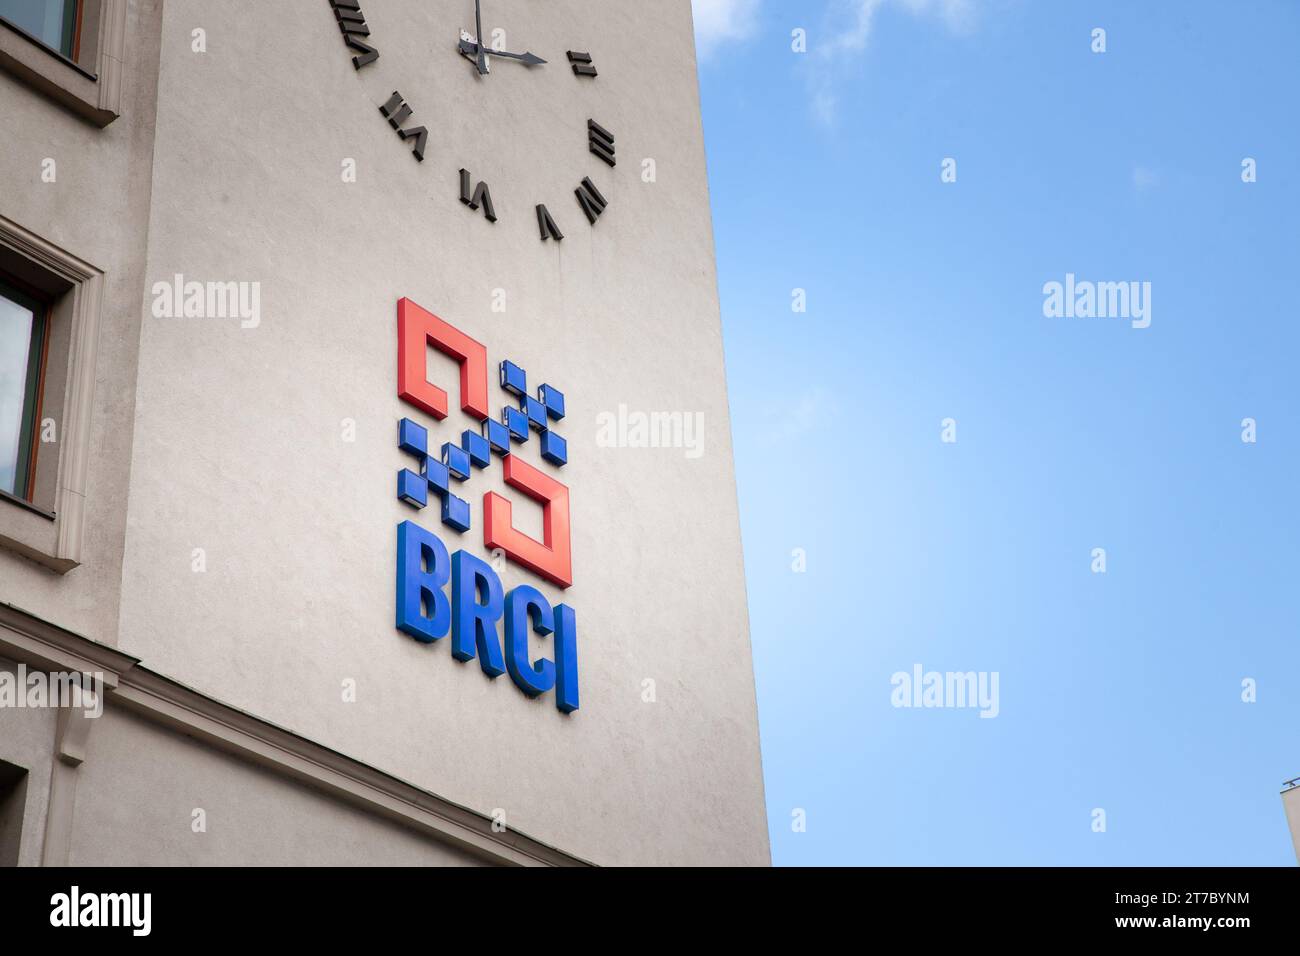 Picture of a sign with the logo of Banca Romana De Credite Si Investitii Bank bank in Bucharest, Romania. Banca Romana De Credite Si Investitii Bank, Stock Photo